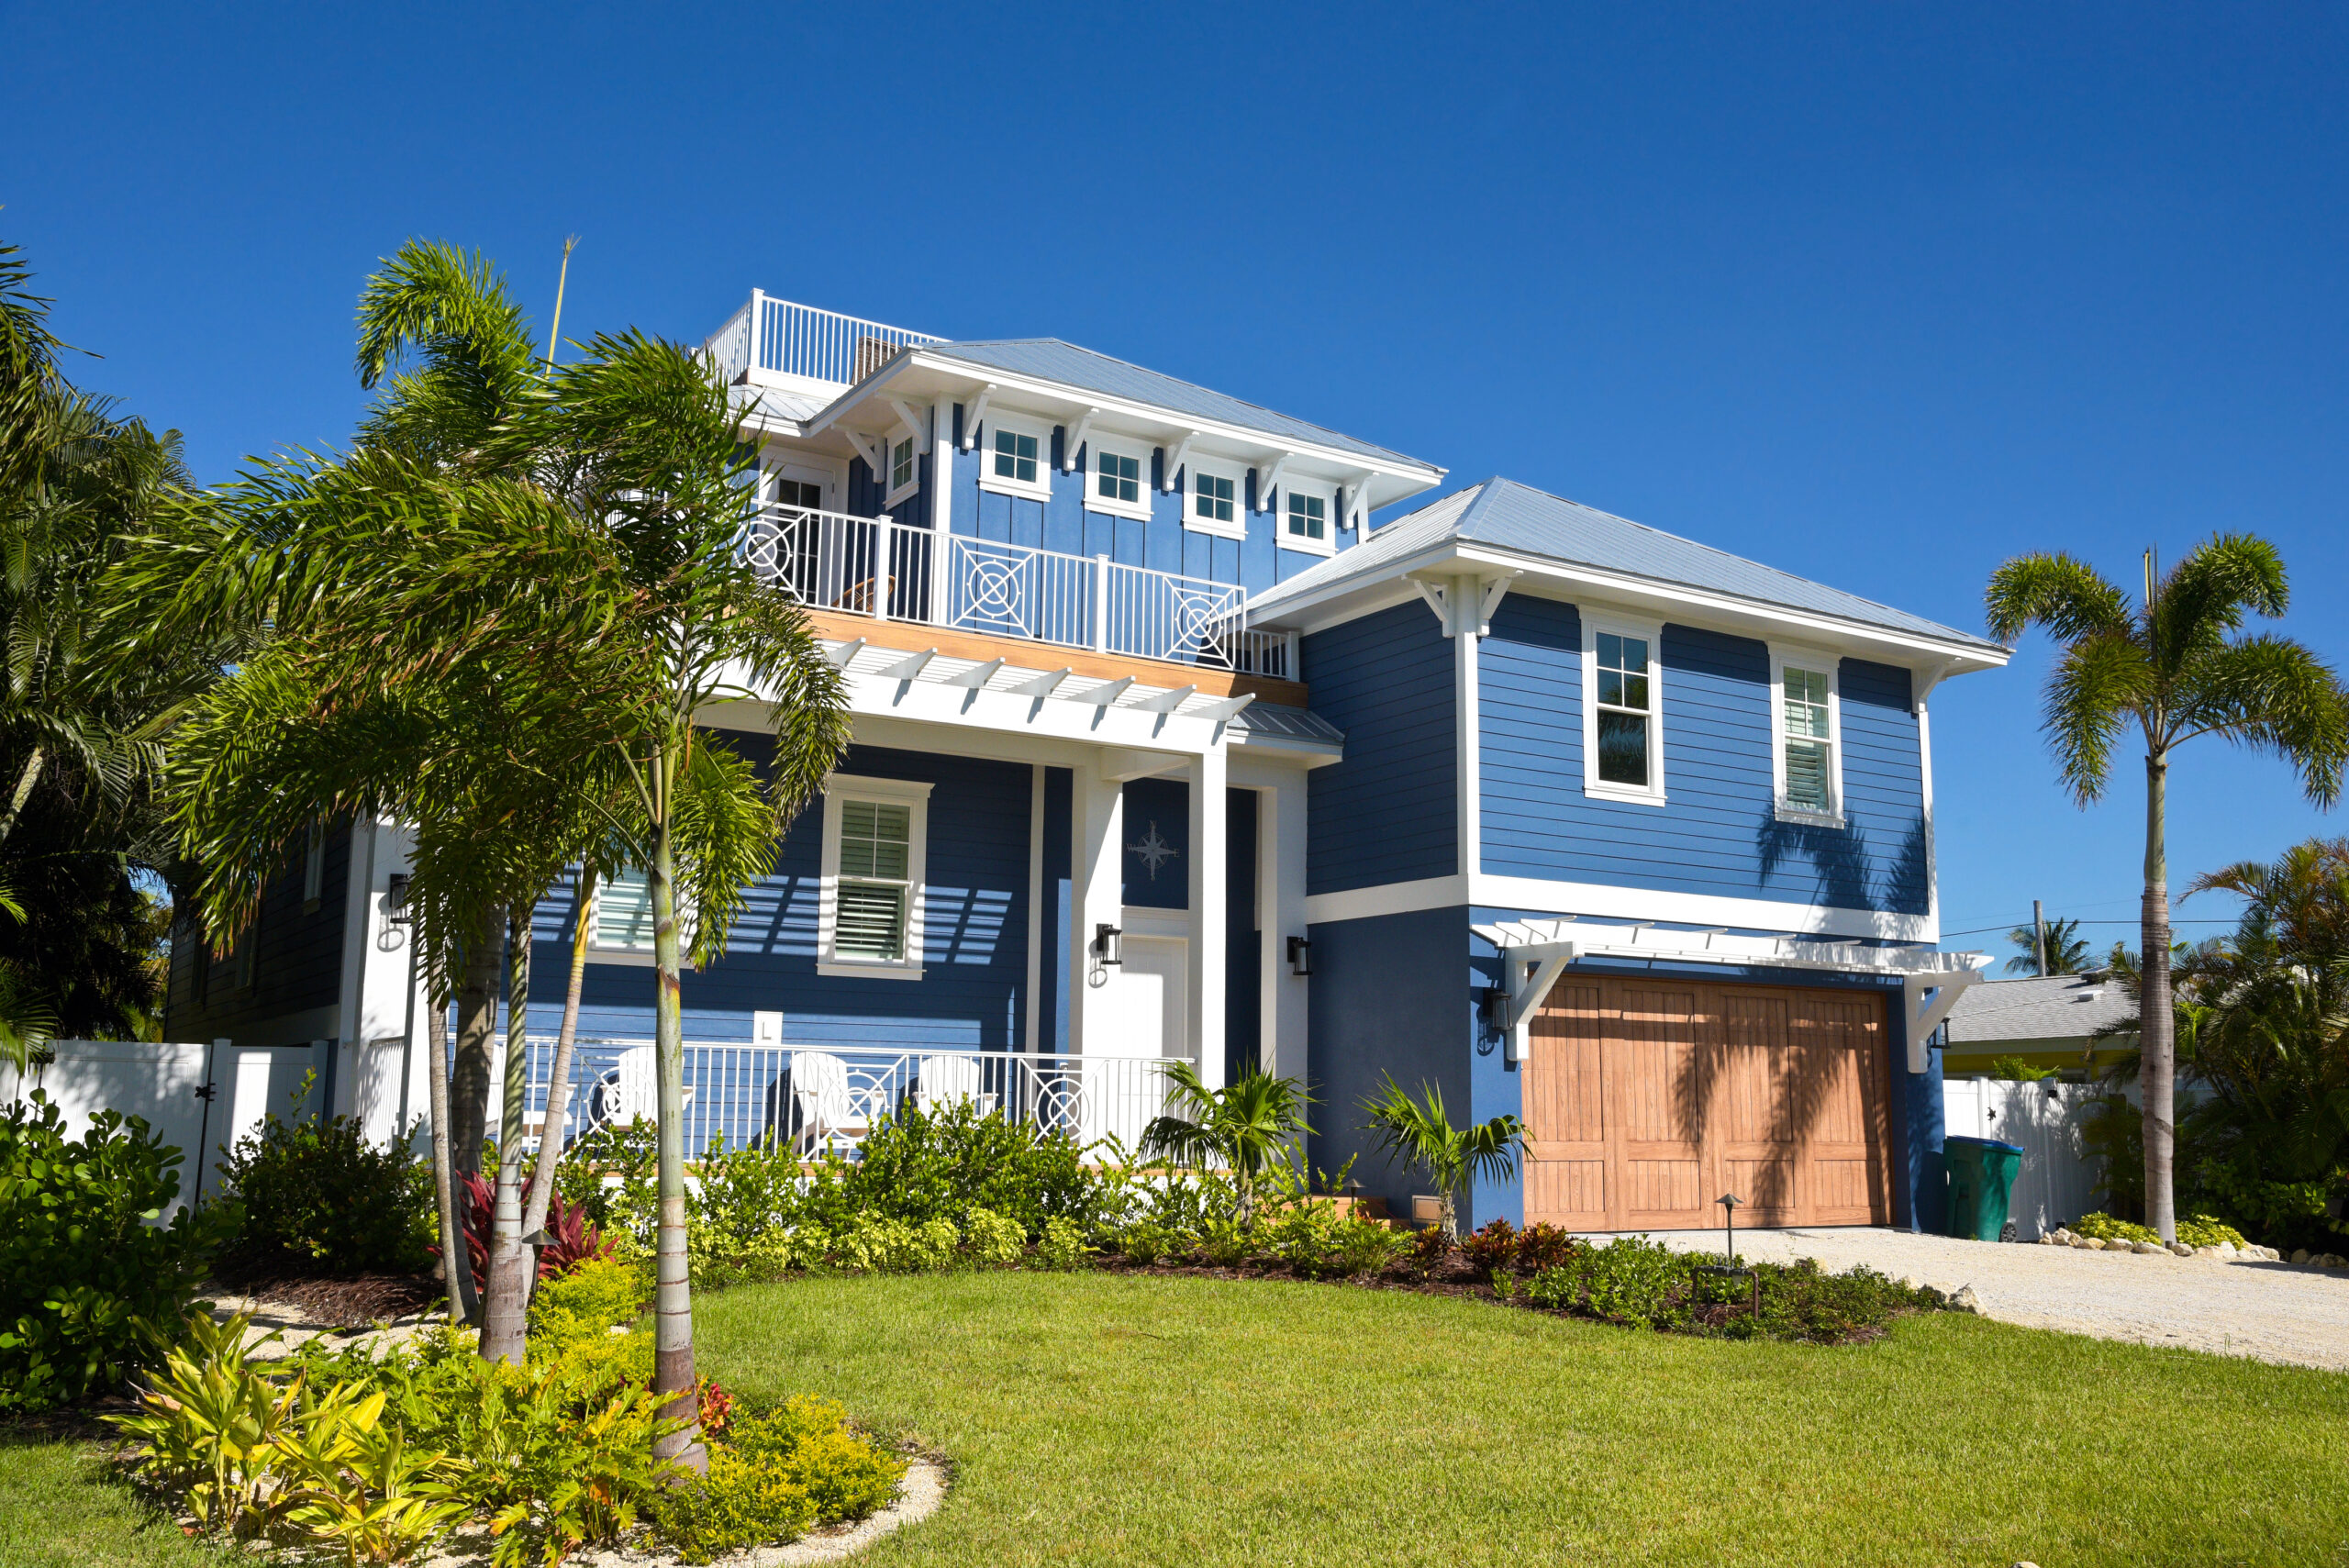 The Benefits of Purchasing a Vacation Home in Florida for Winter Getaways